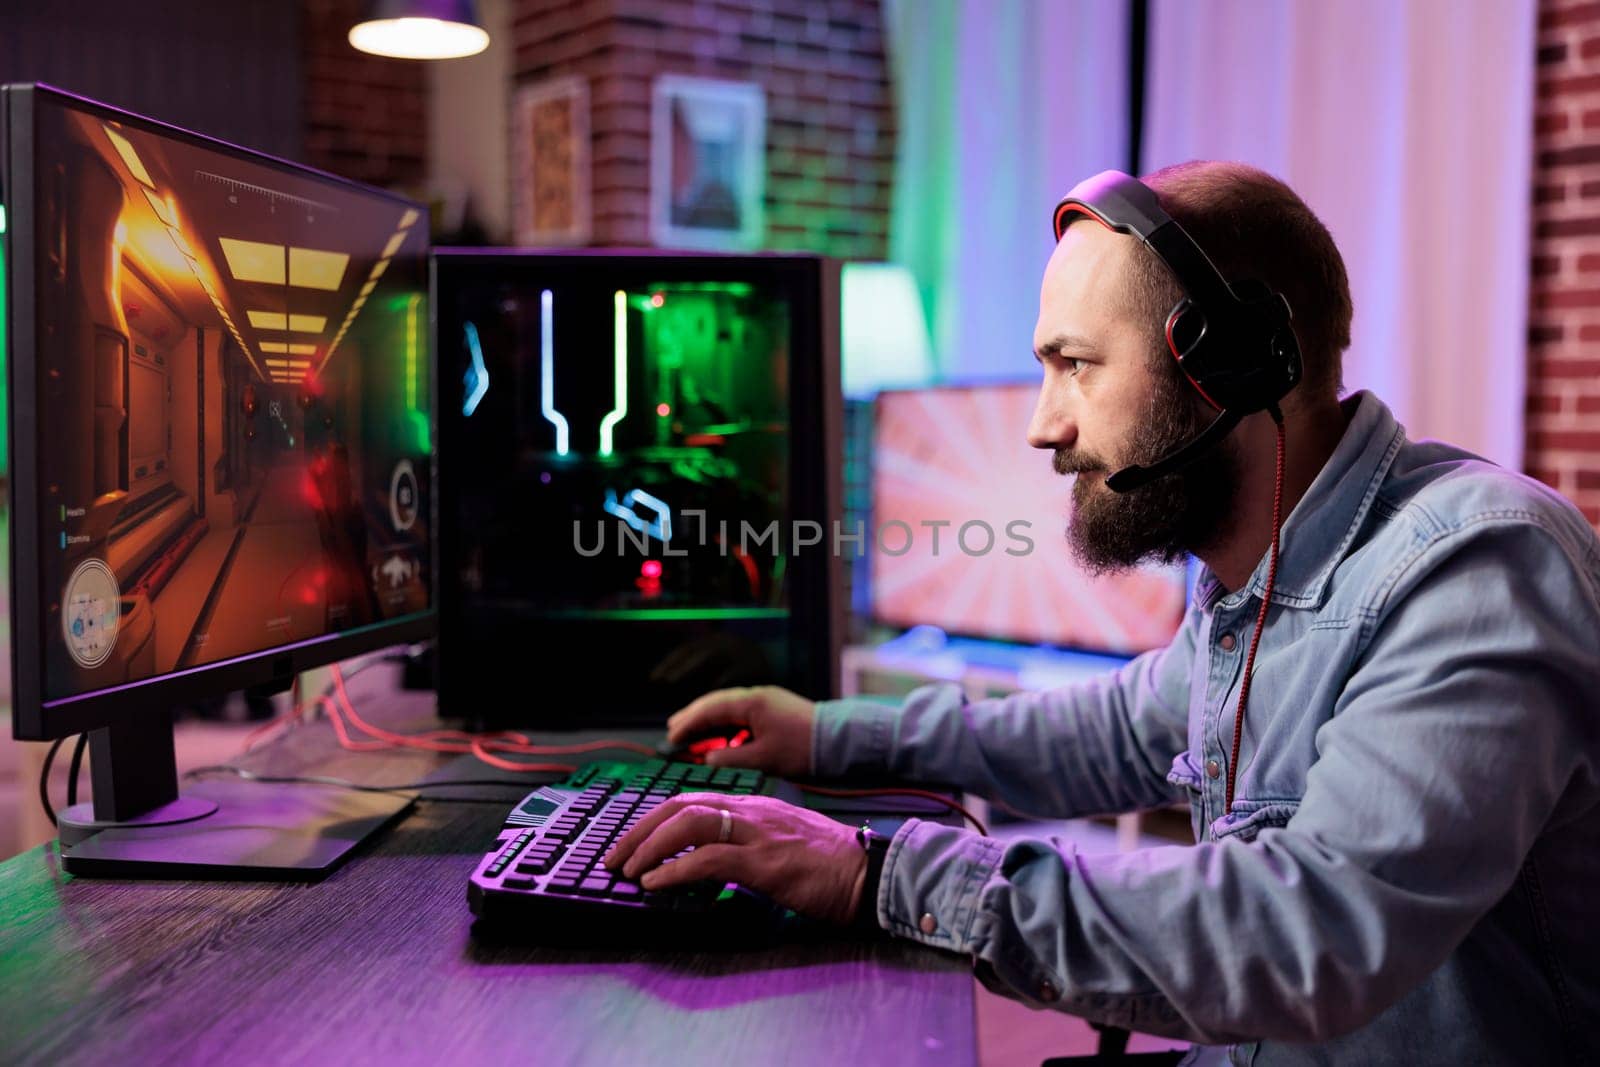 Pro gamer competing in intense online multiplayer videogame, streaming live from brick wall apartment. Focused man using gaming system and headphones for immersive experience